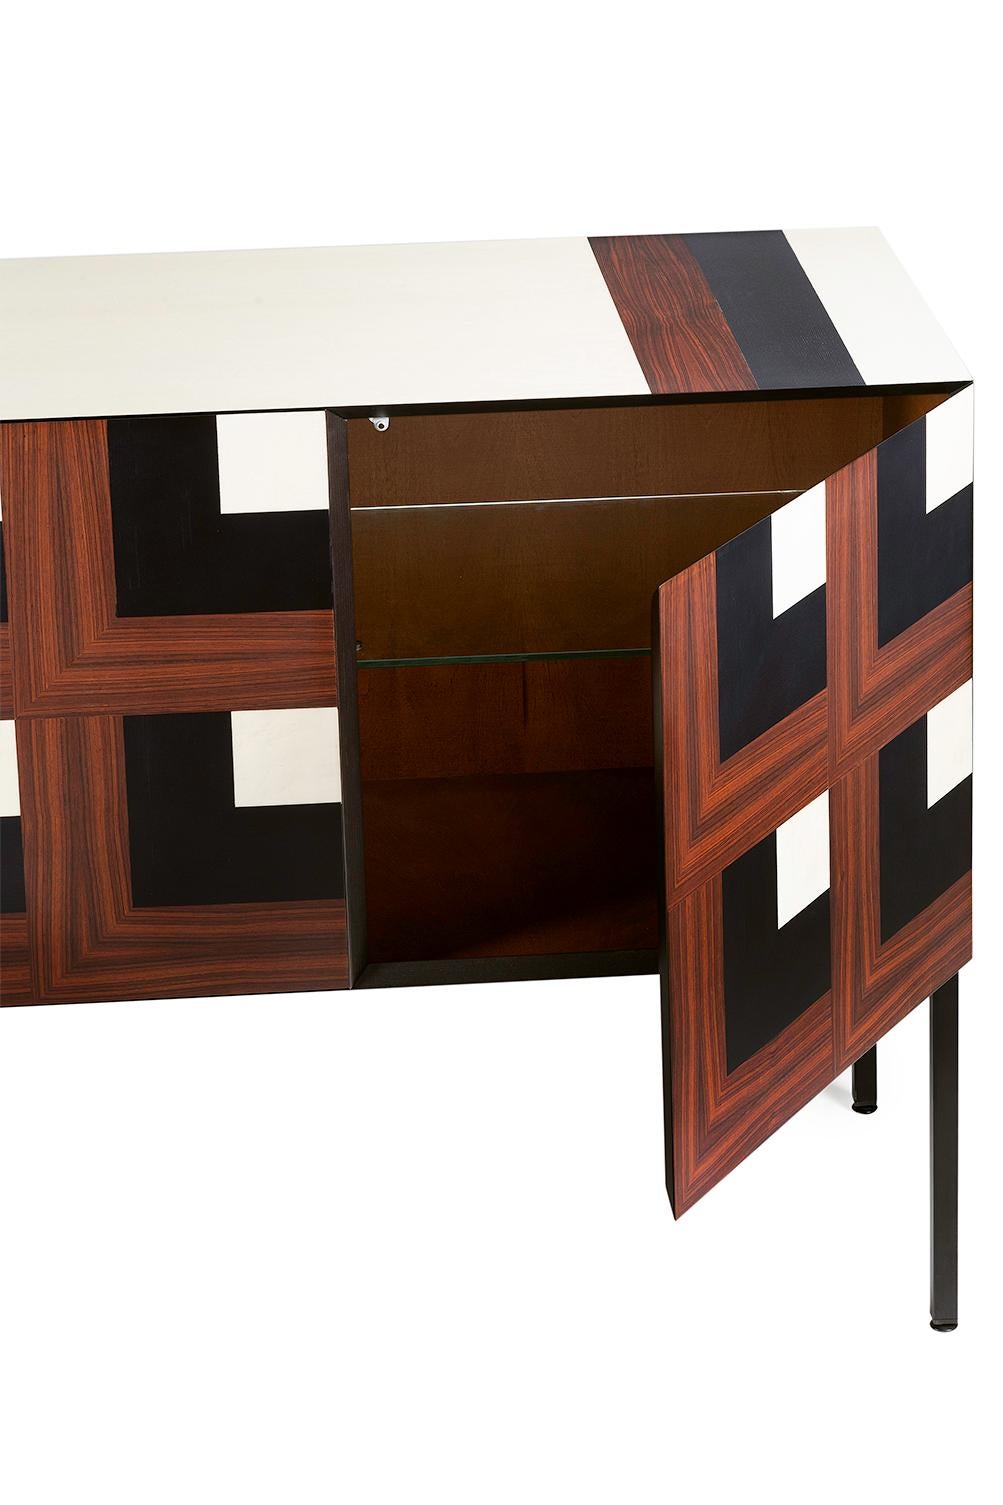 21st Century Cubo Inlaid Sideboard in Ash, Maple, Walnut, Made in Italy, Hebanon In New Condition For Sale In Nocera Superiore, Campania